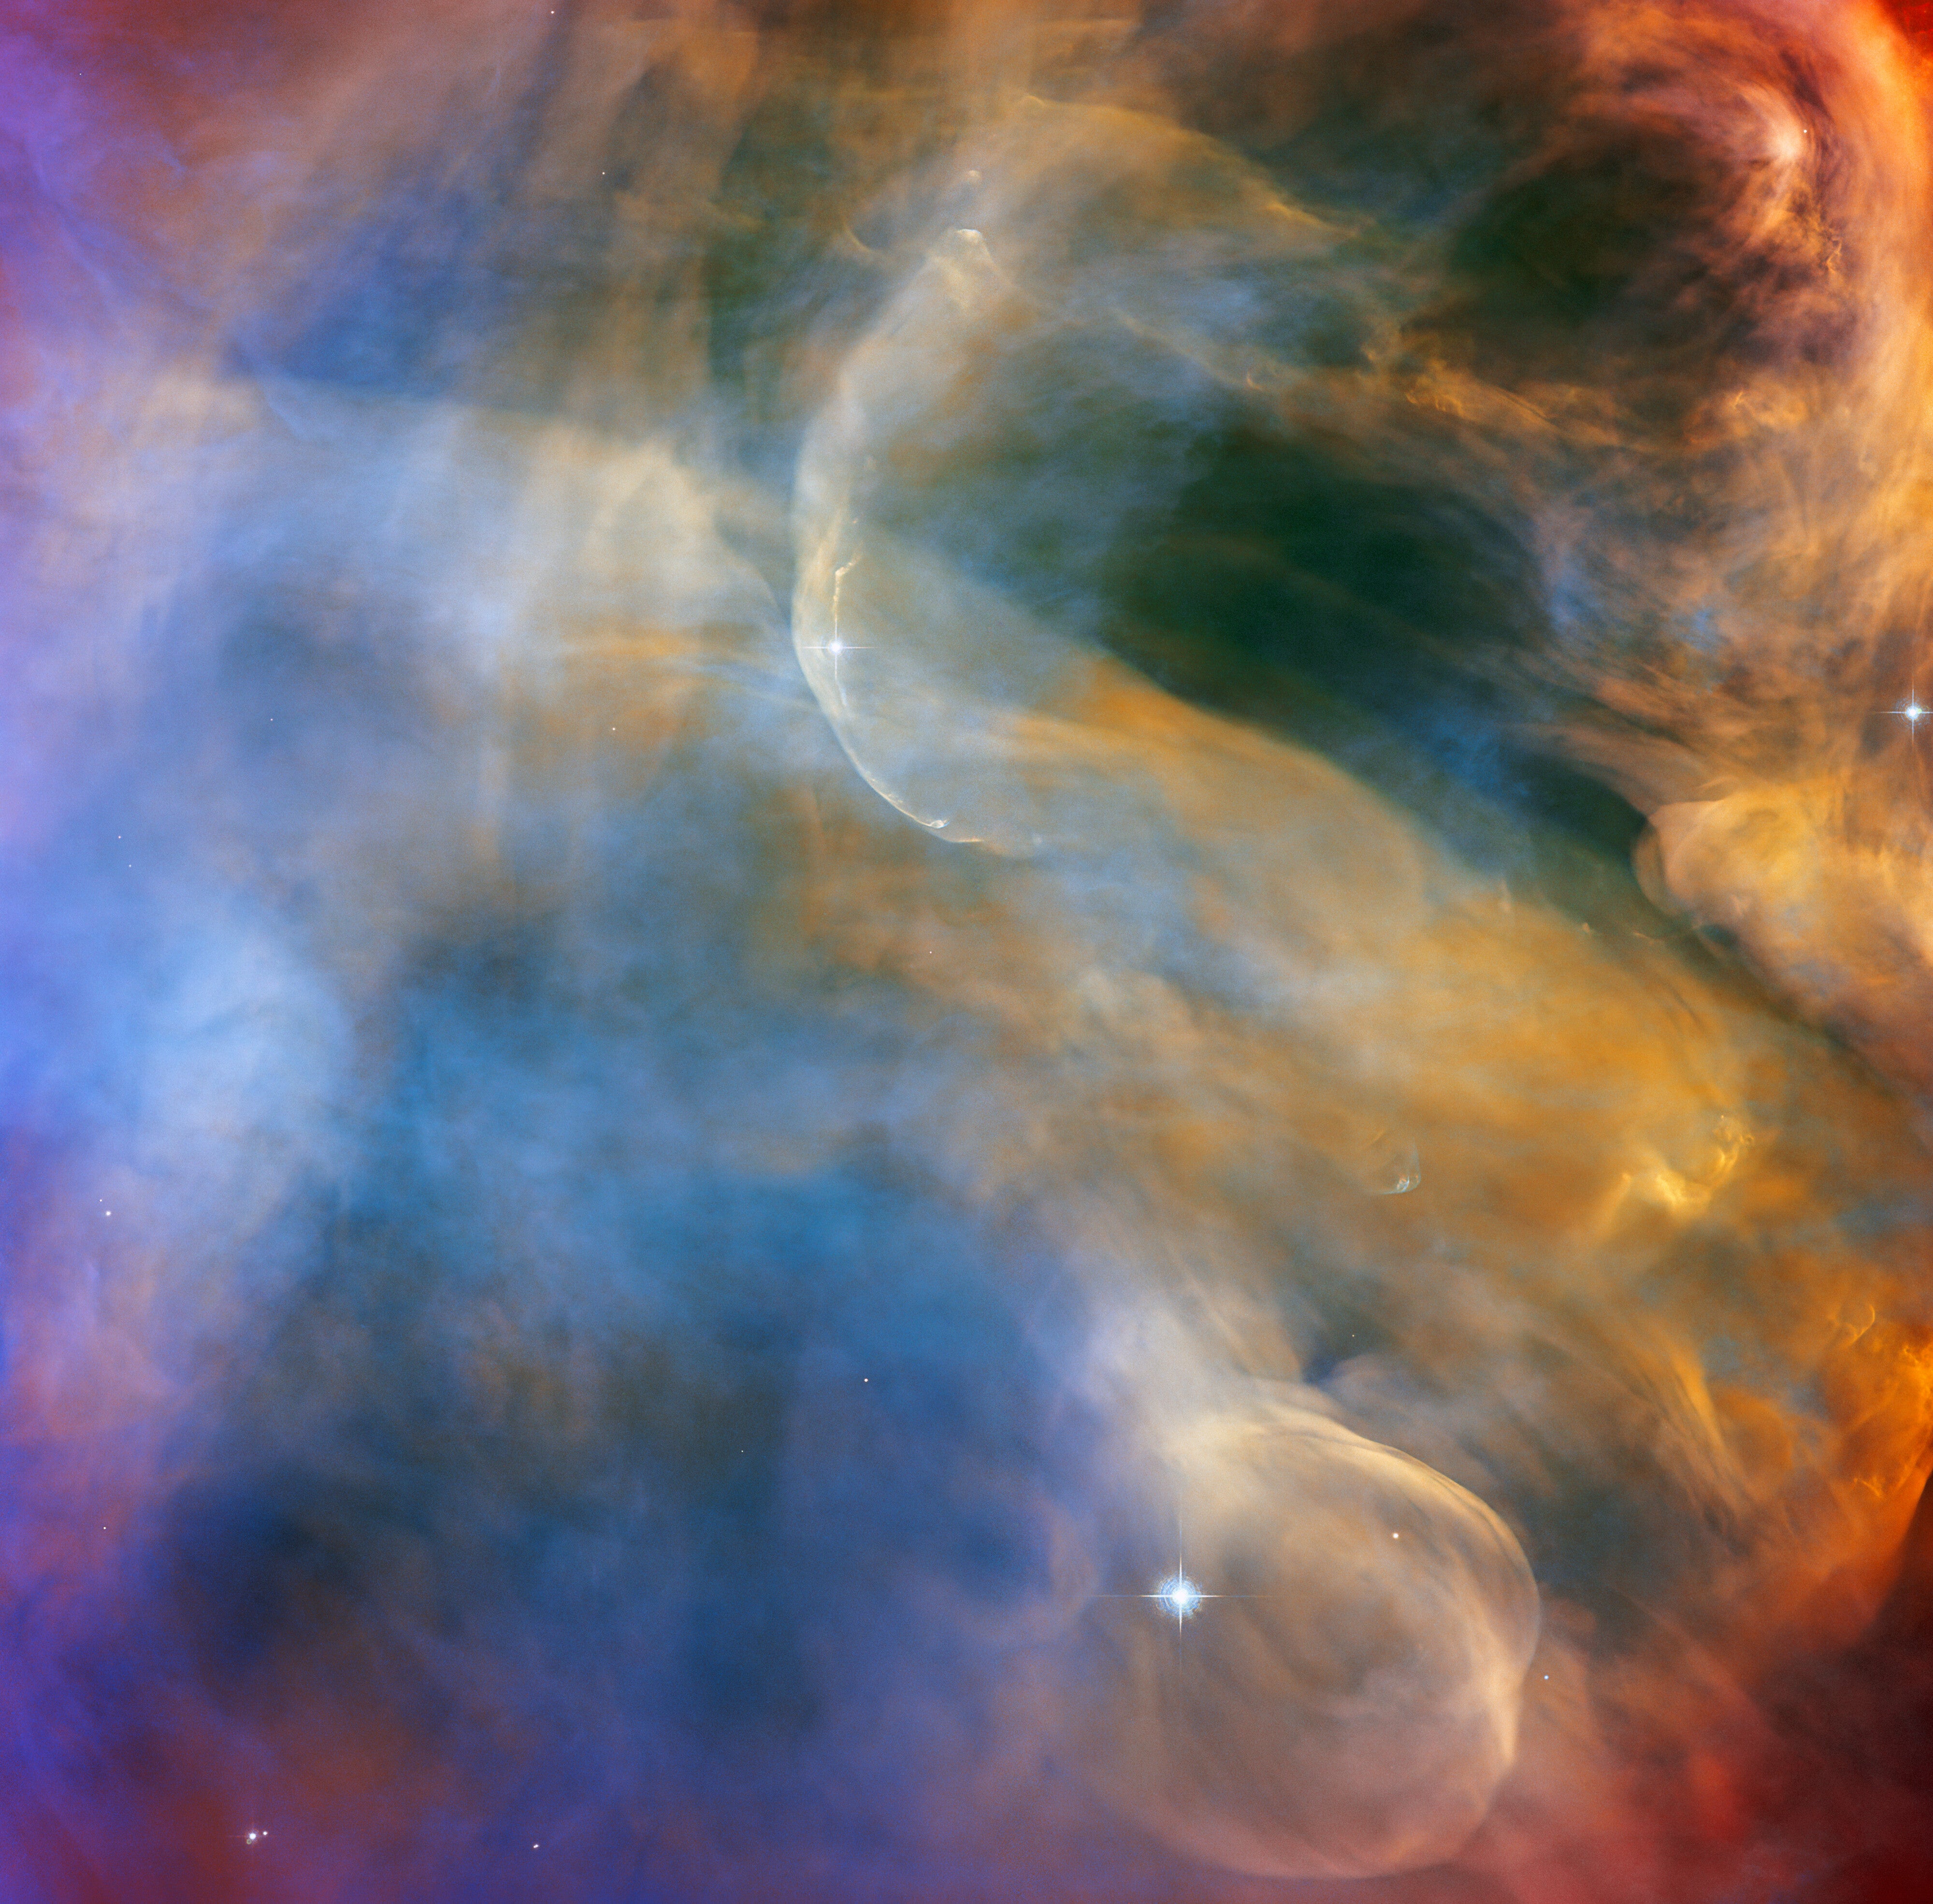 The Hubble Space Telescop reveals colorful outflows of stellar gas in the Orion Nebula